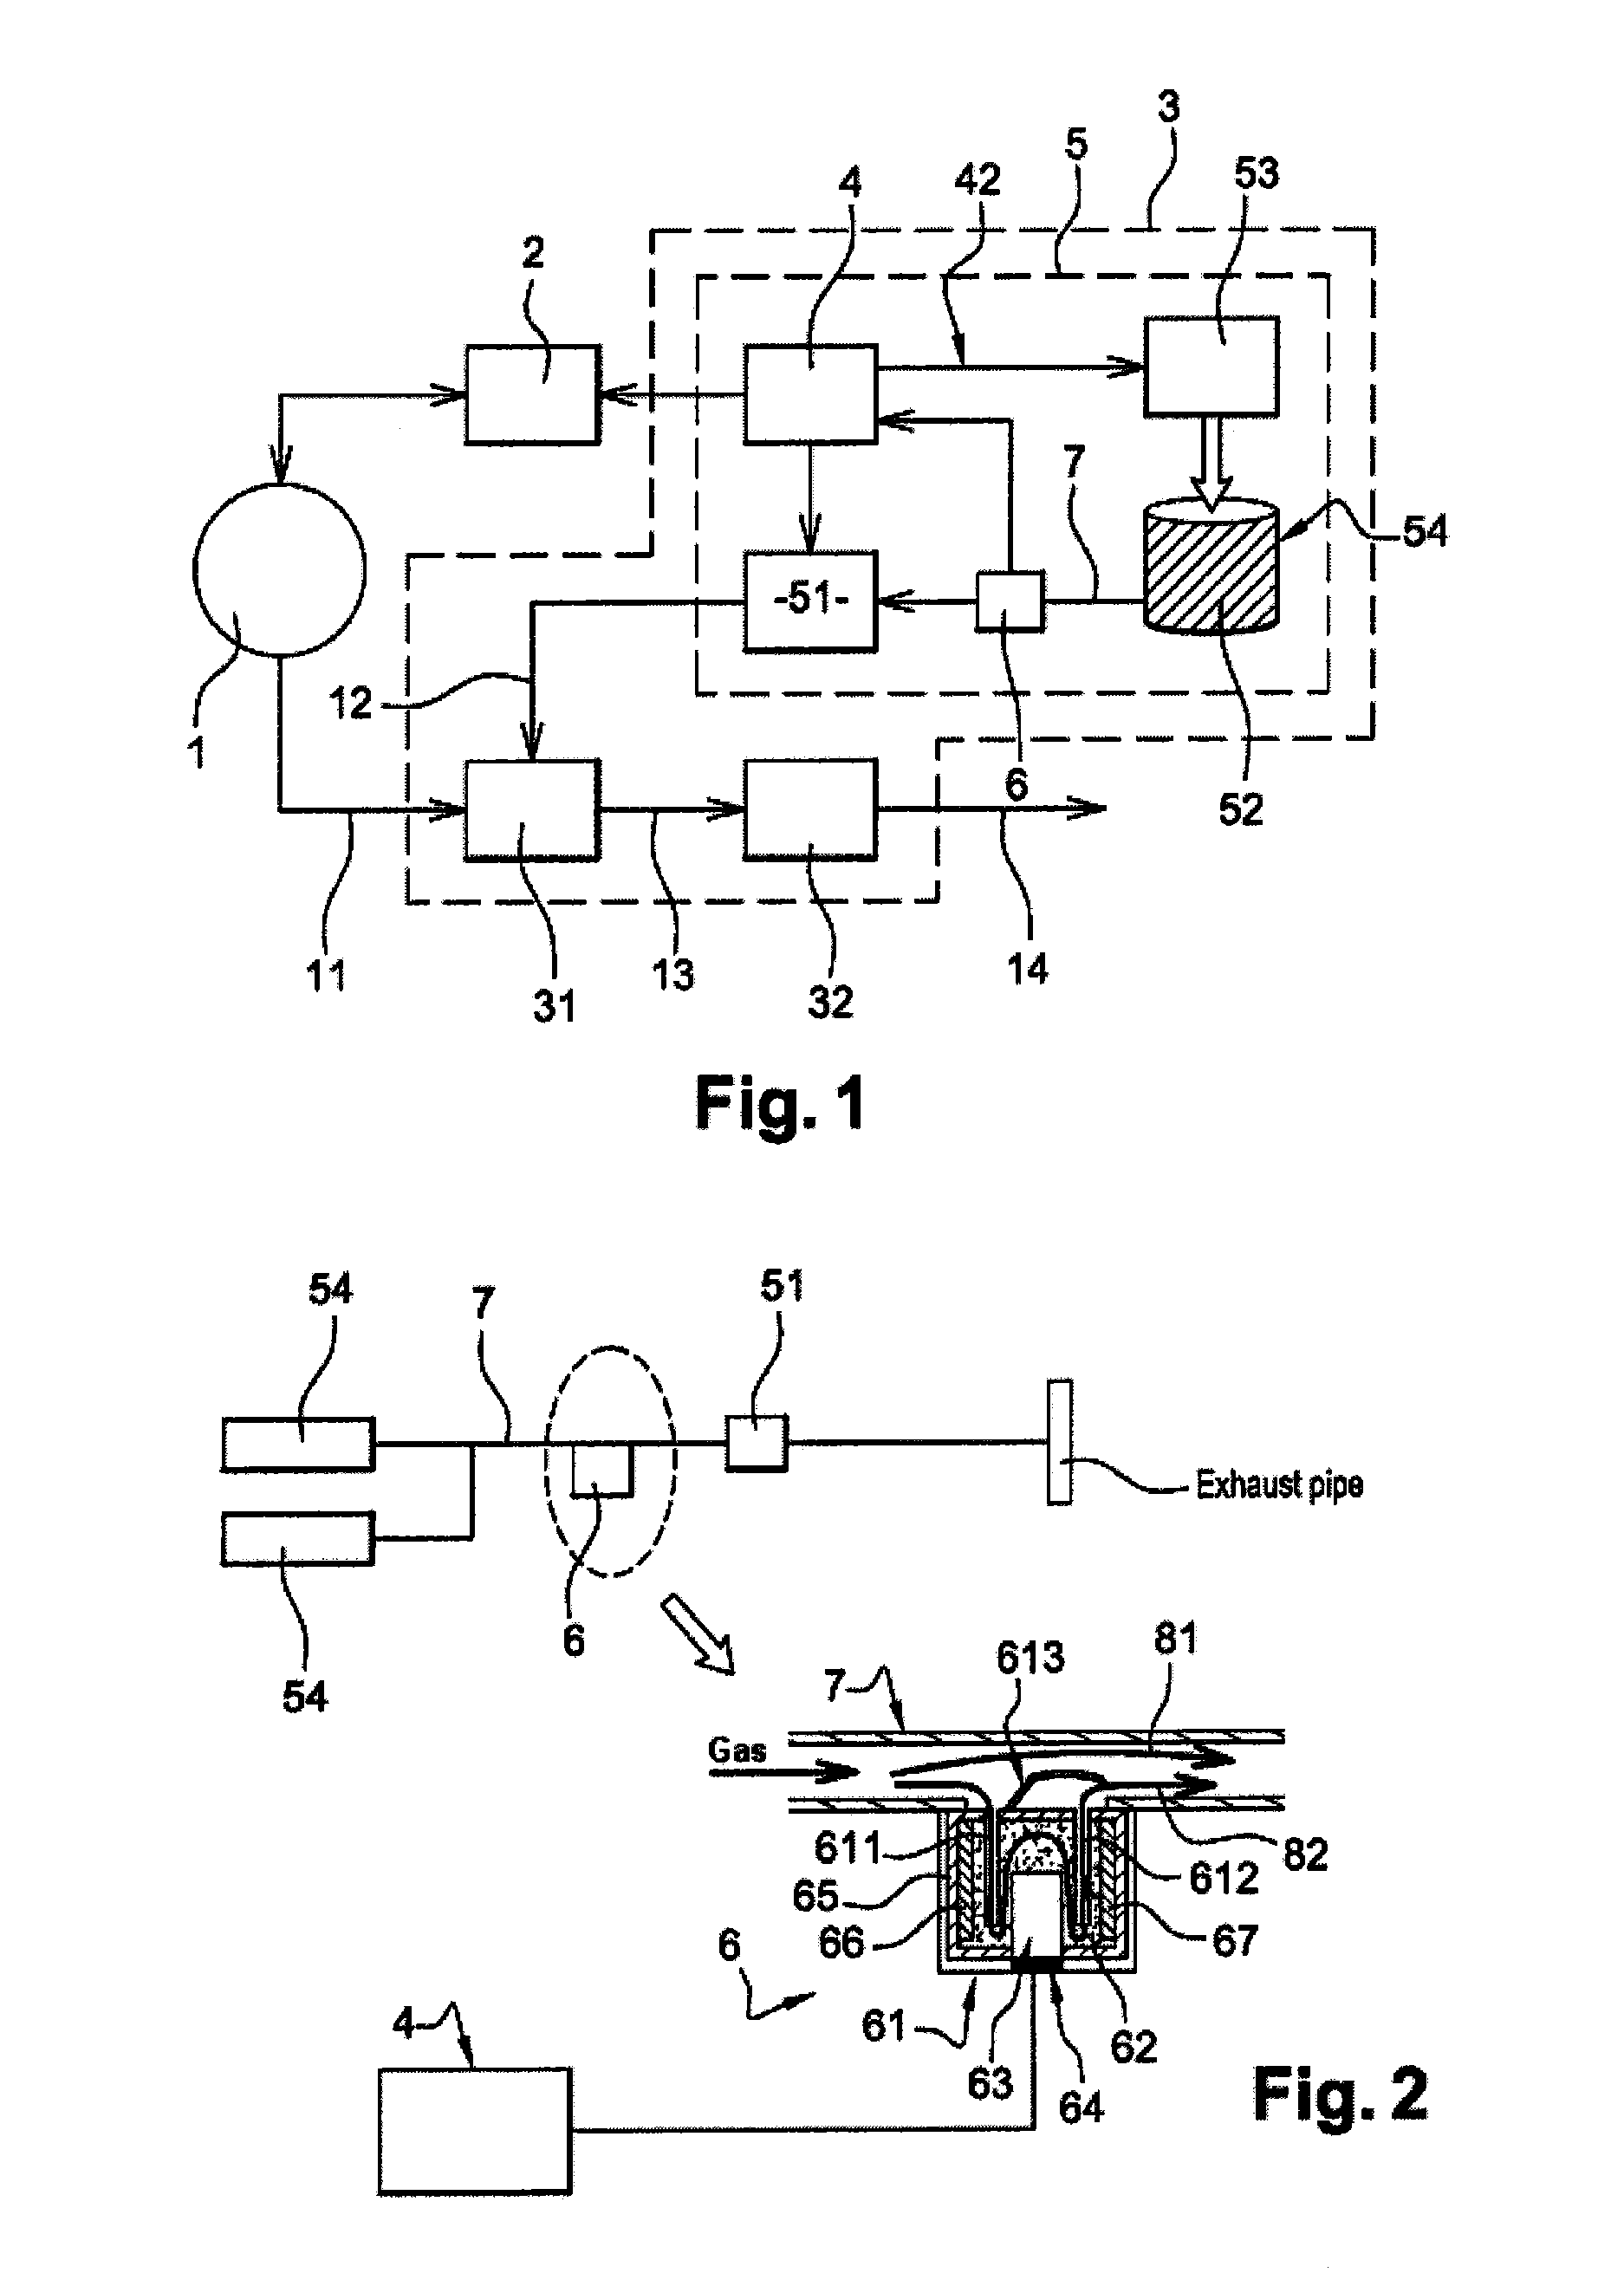 Device for measuring the pressure of a gas in a pollution control or energy storage system